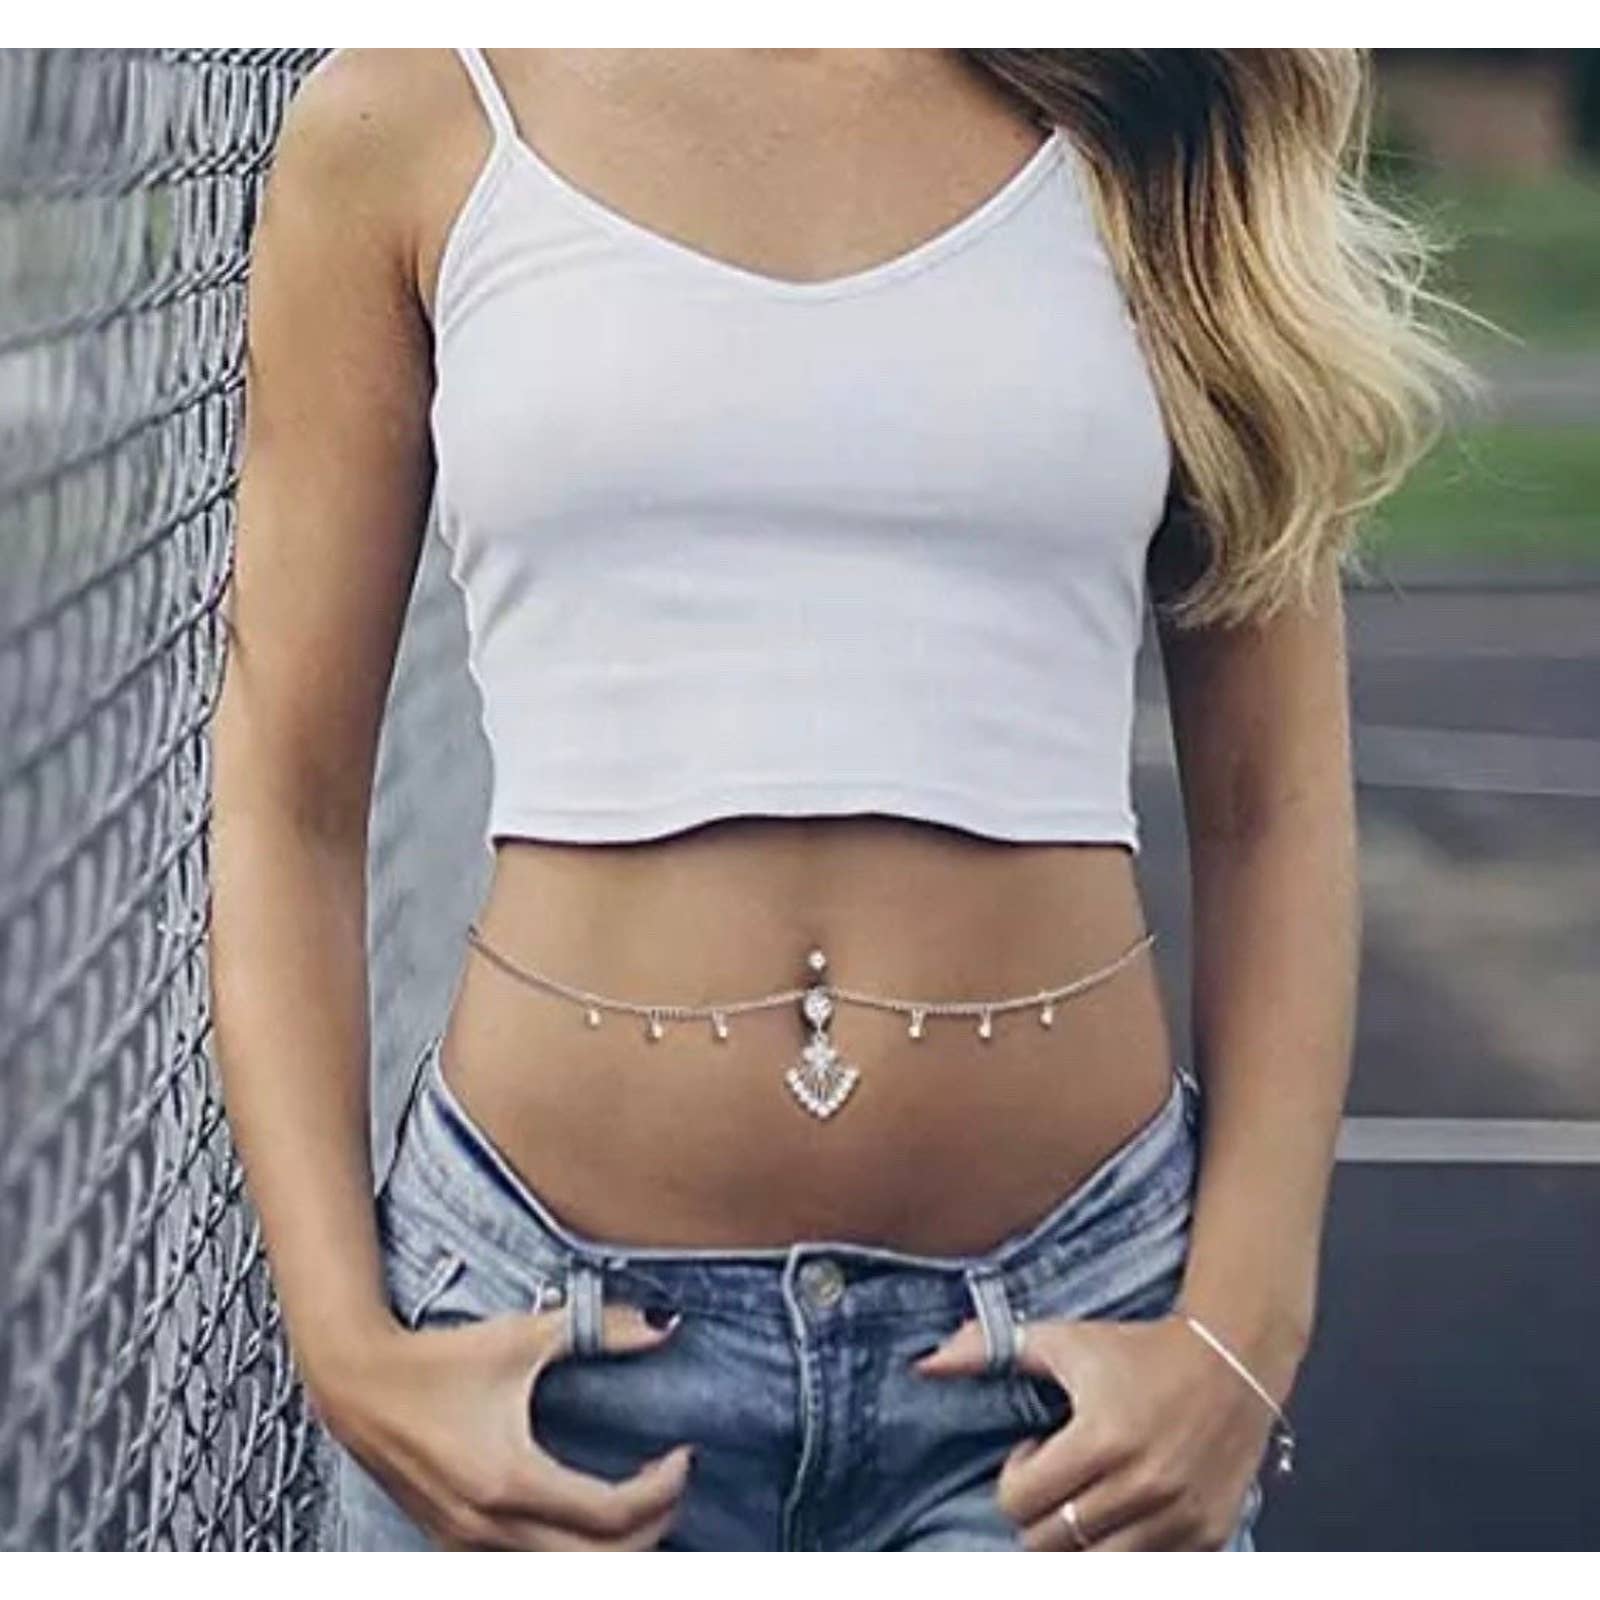 Waist Chain with Belly Ring - Dangle Belly Button Ring - Crystal Belly Chain